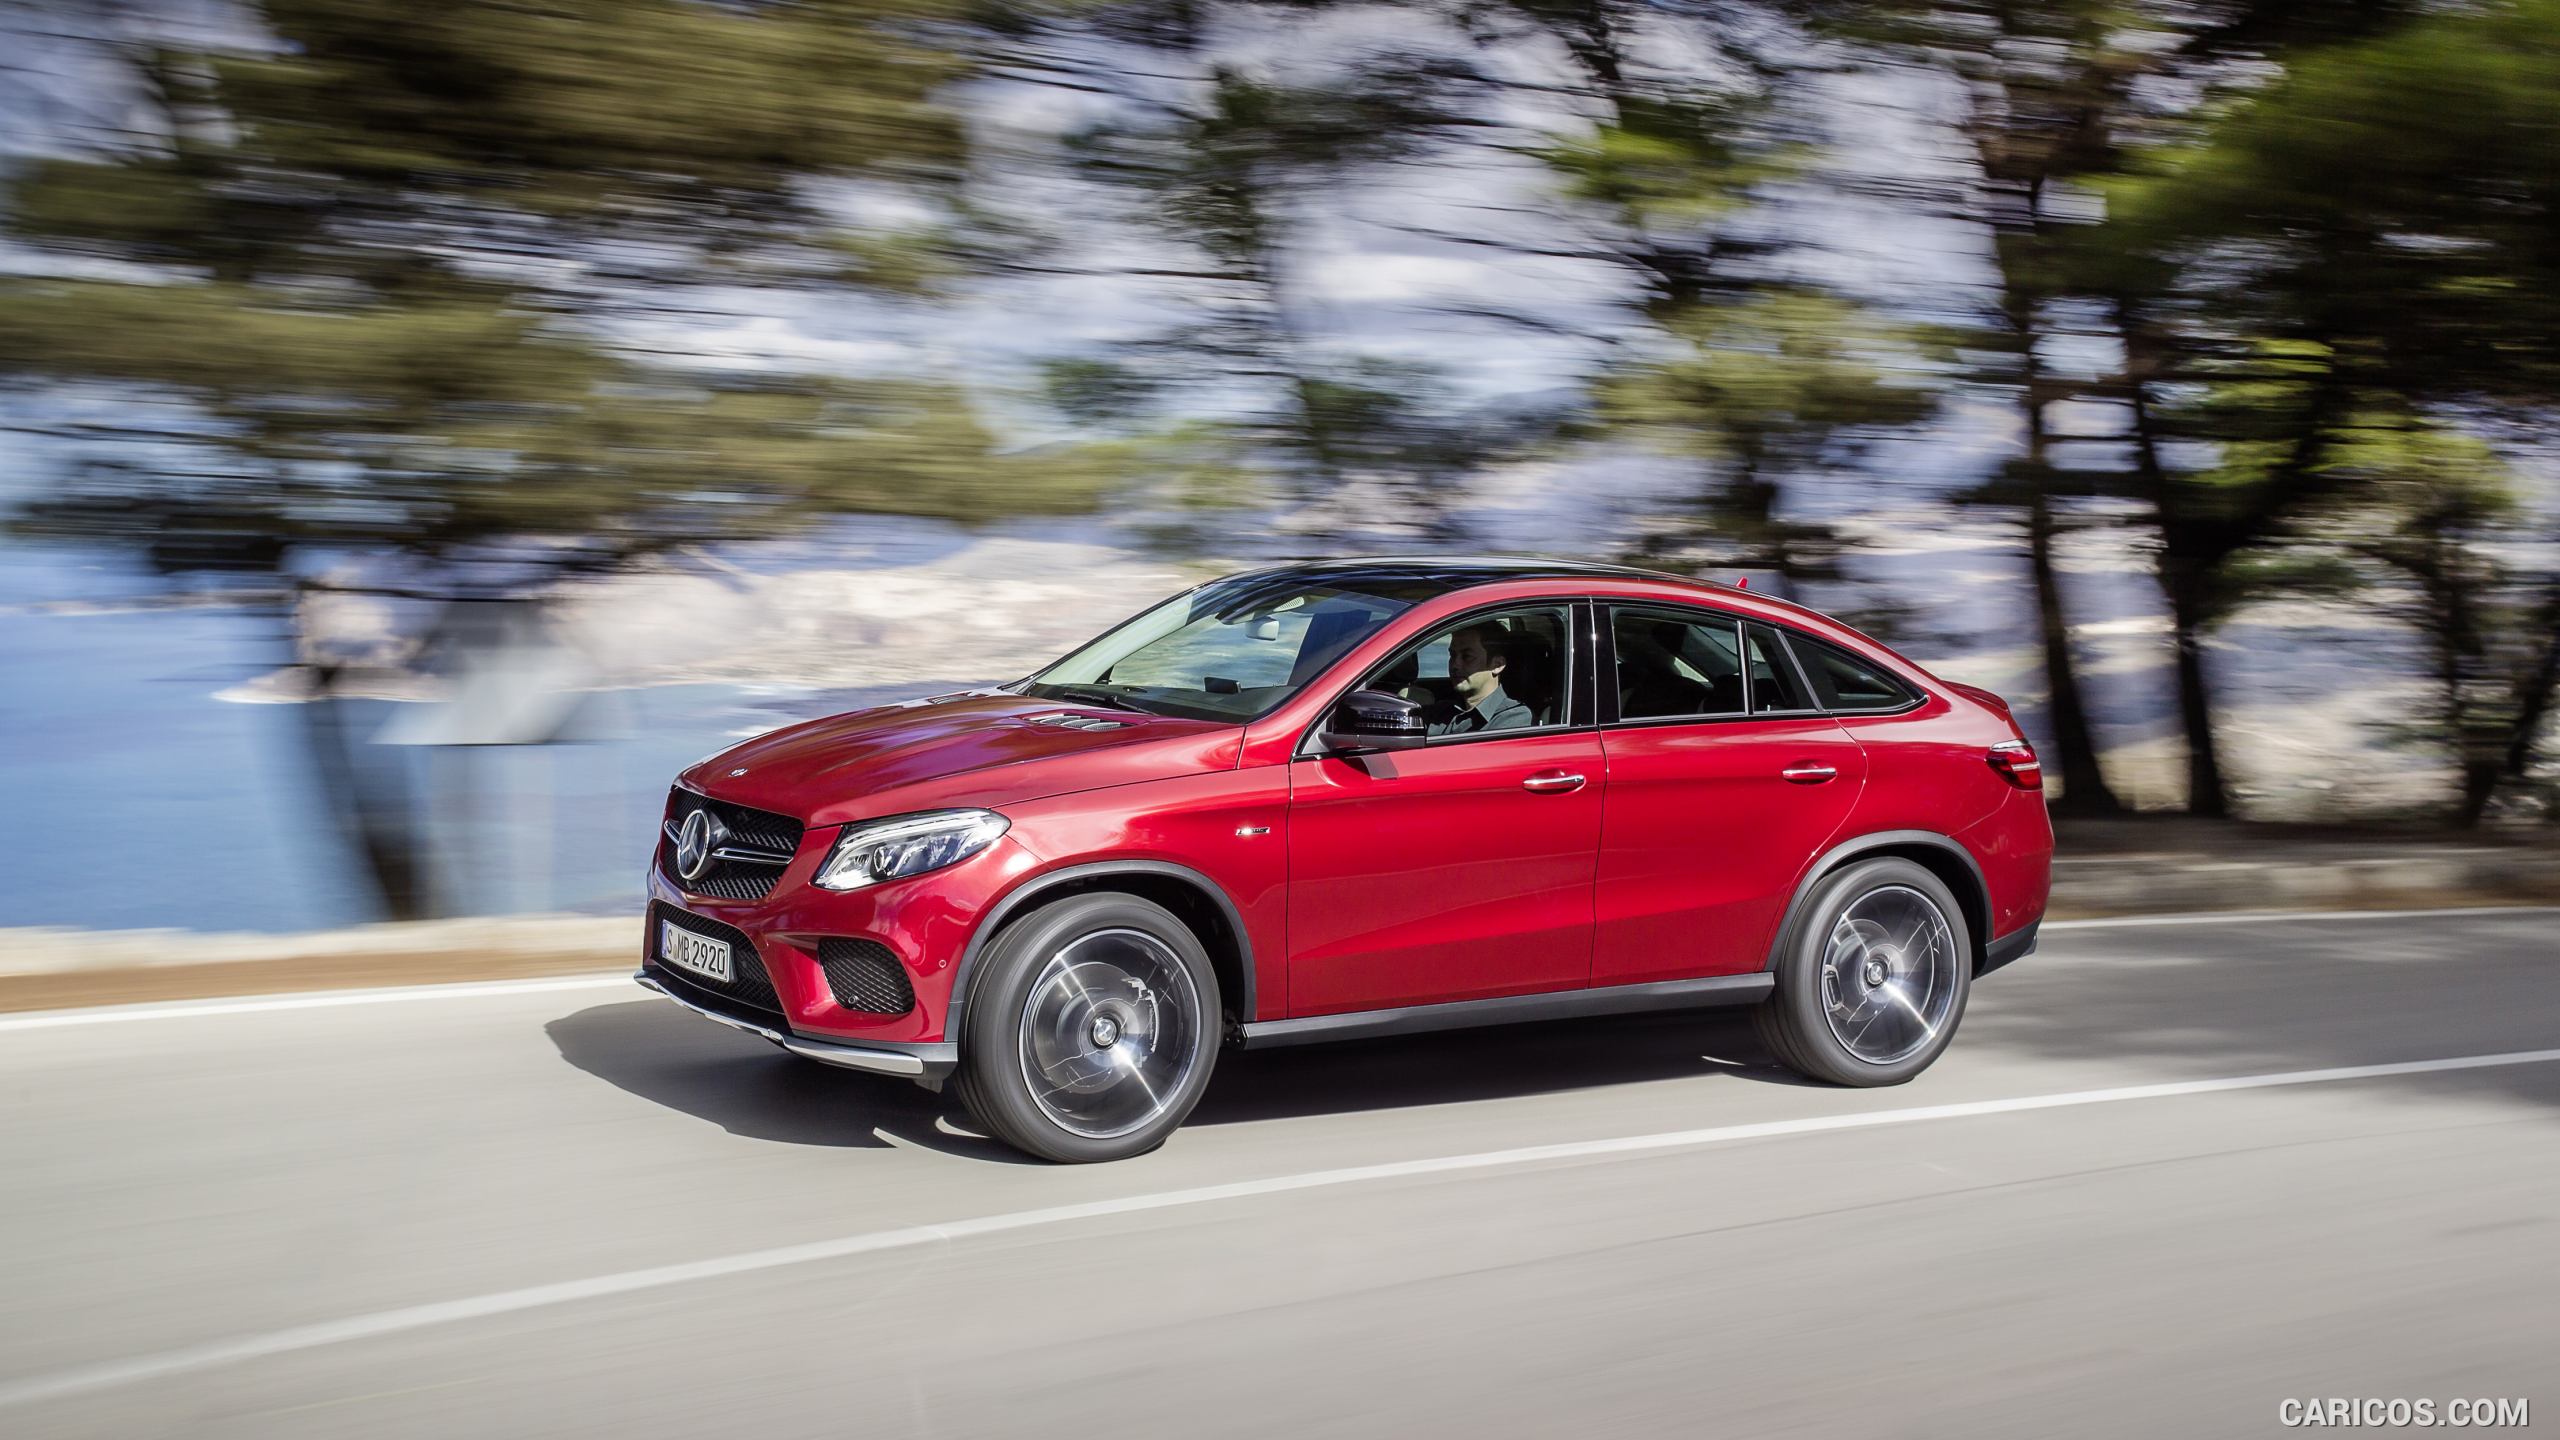 2016 Mercedes-Benz GLE 450 AMG Coupe 4MATIC (Designo Hyacinth Red Metallic) - Side, #12 of 115